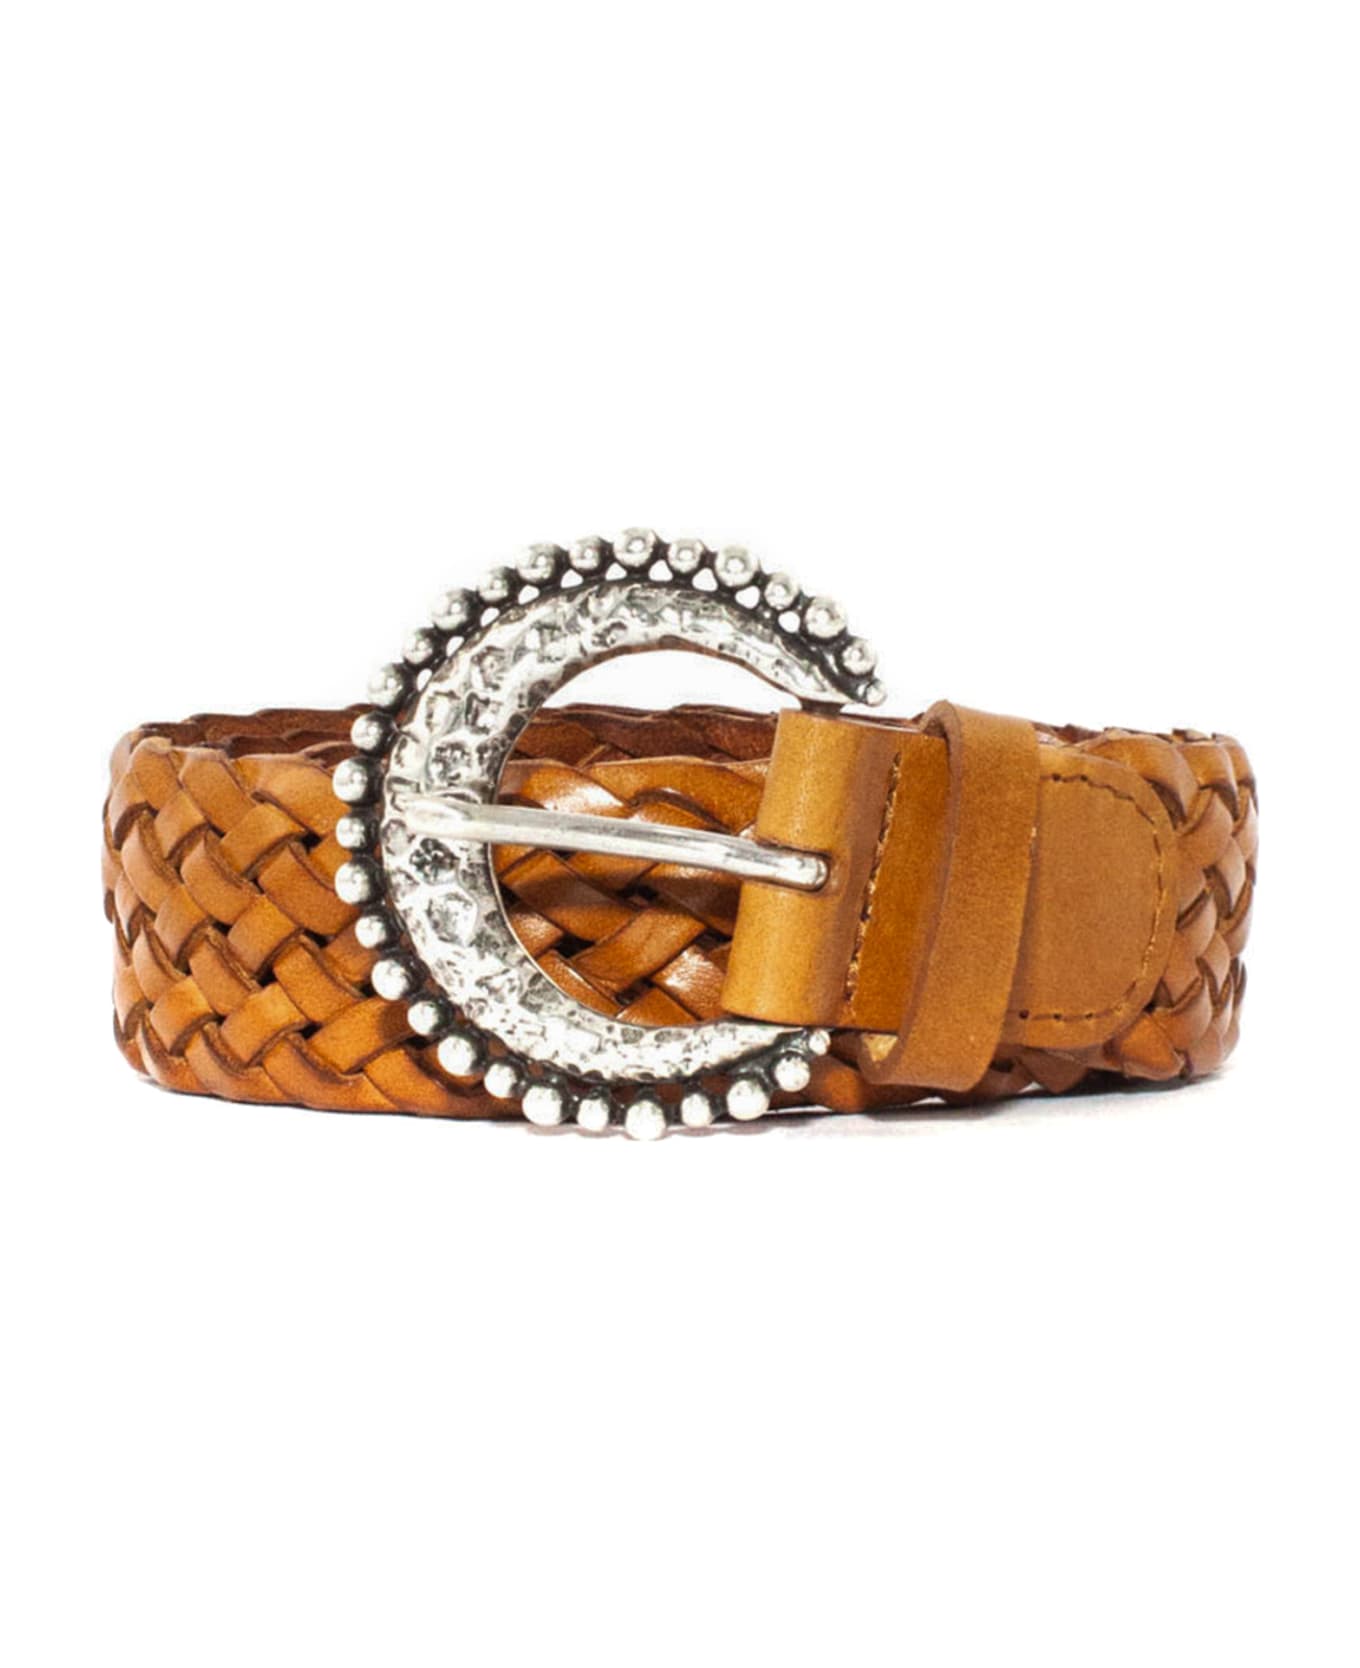 Orciani Braided Leather Belt - Cuoio